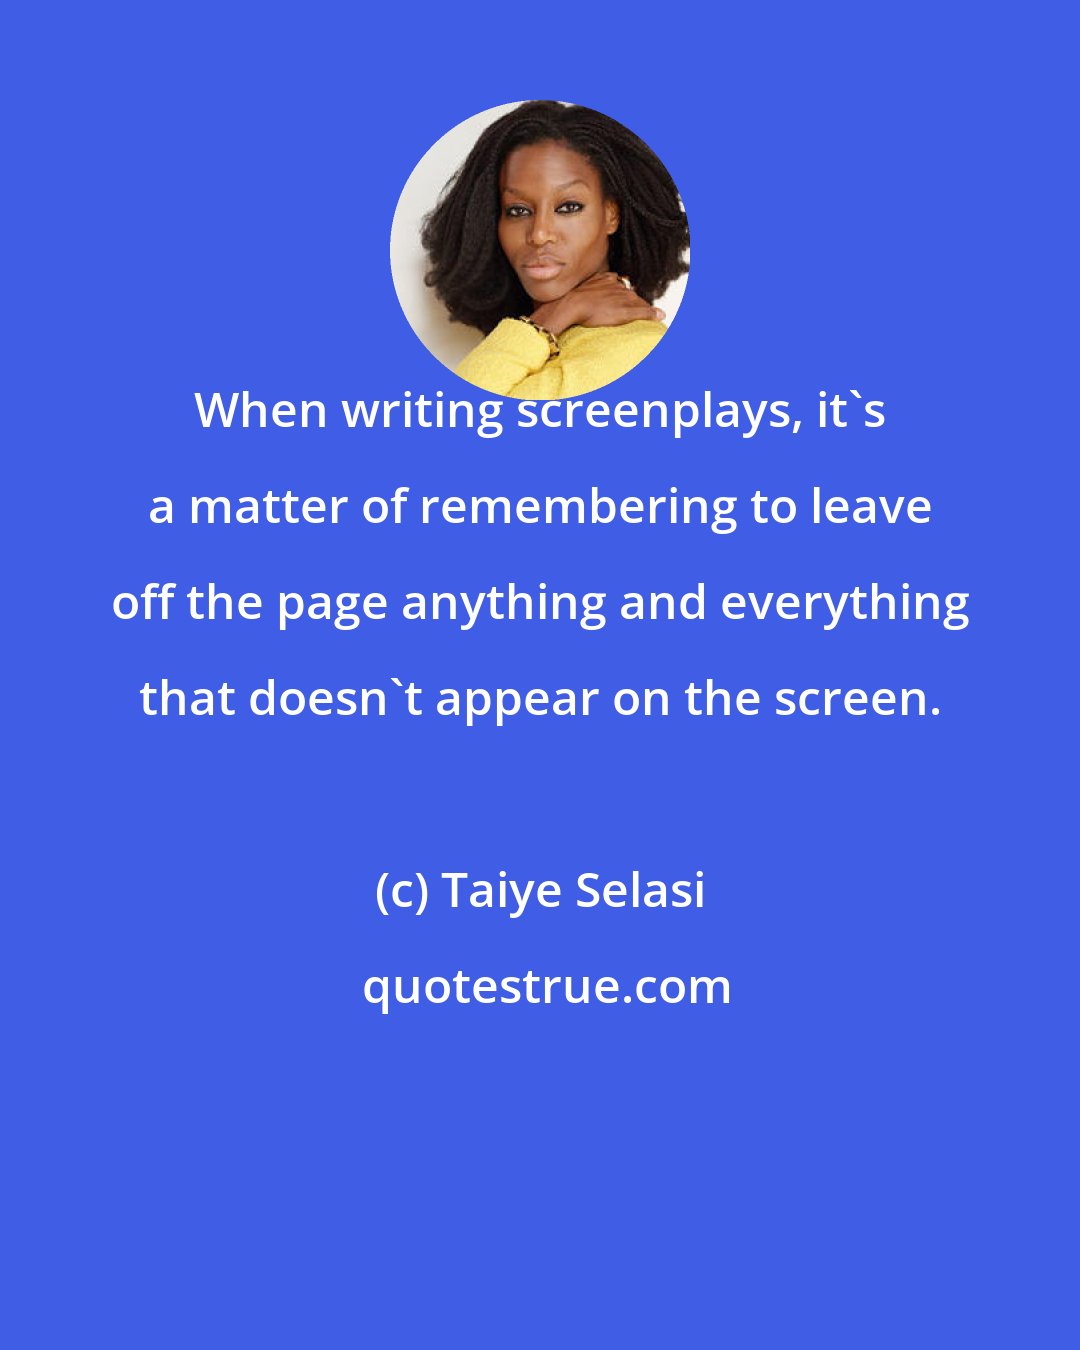 Taiye Selasi: When writing screenplays, it's a matter of remembering to leave off the page anything and everything that doesn't appear on the screen.